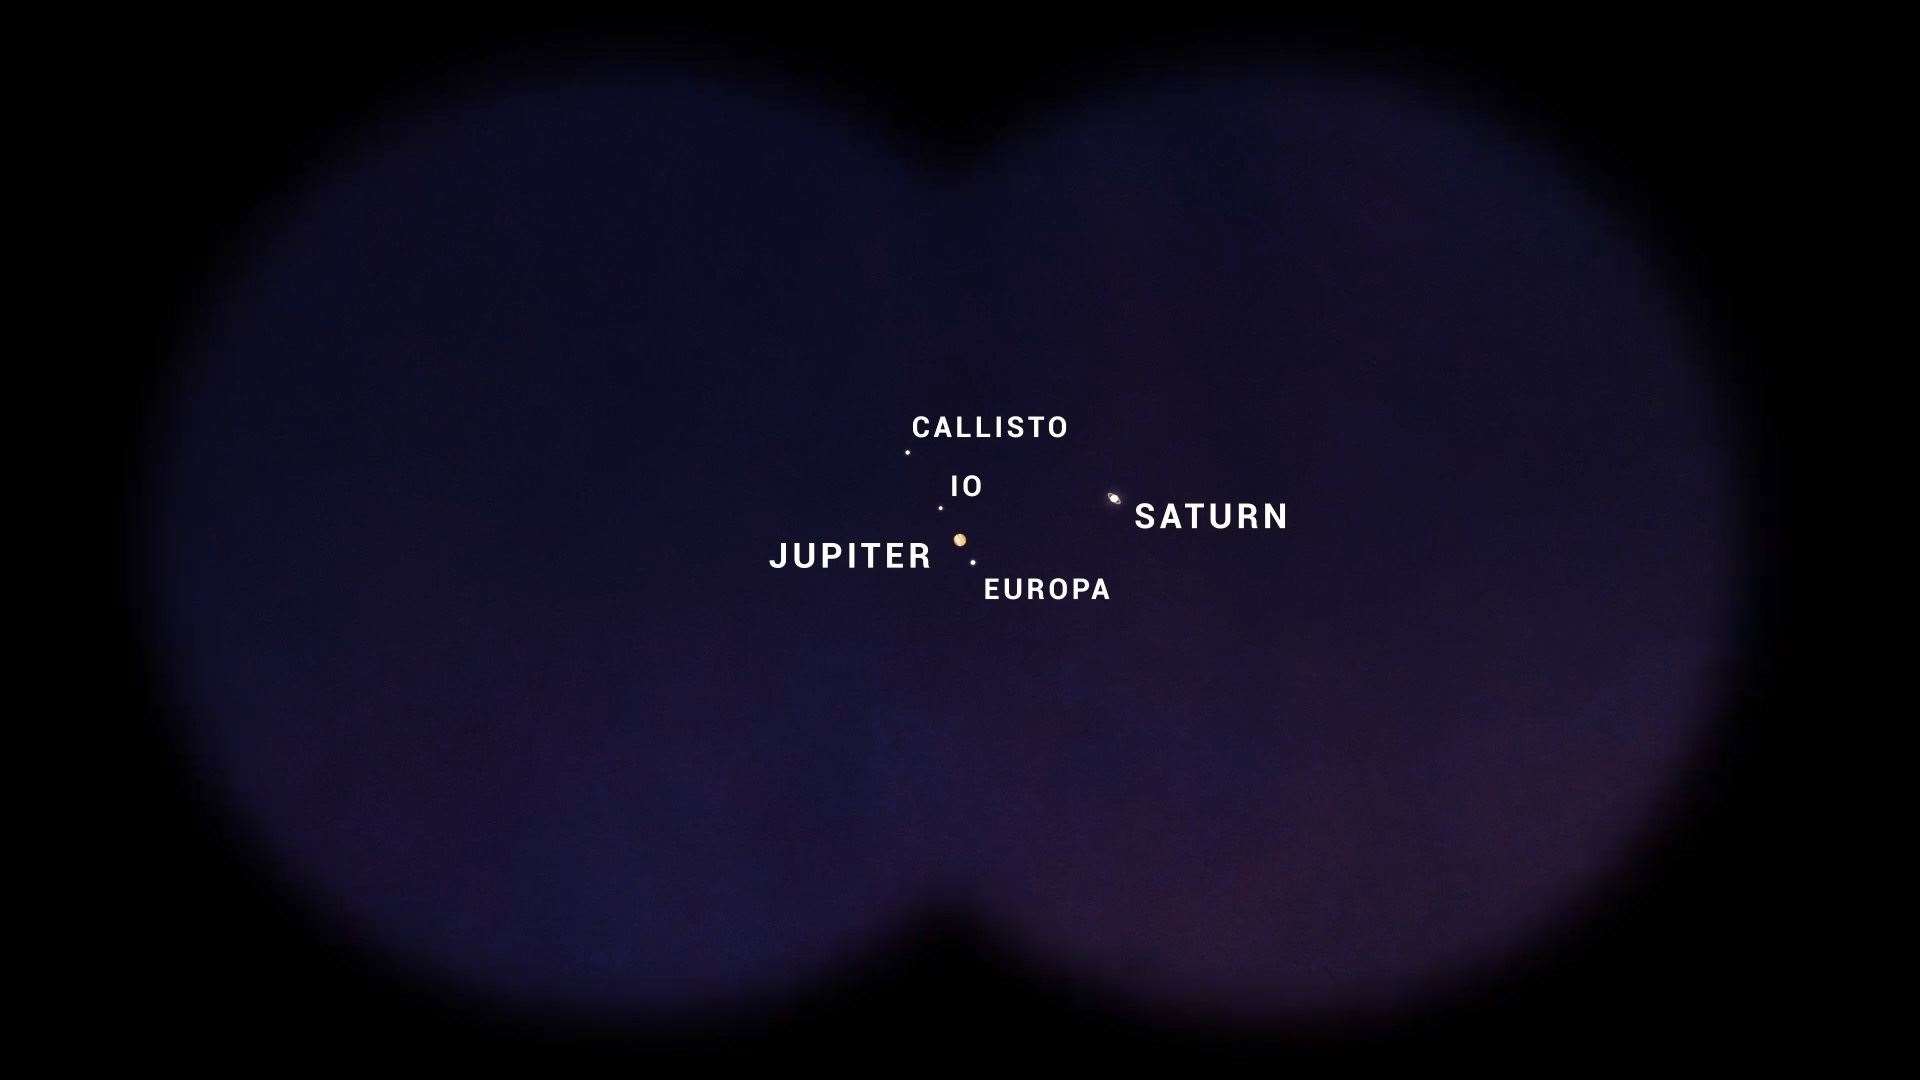 How Jupiter, with its four Galilean moons, and Saturn could appear on December 21 through high quality binoculars. Image: NASA/JPL-Caltech